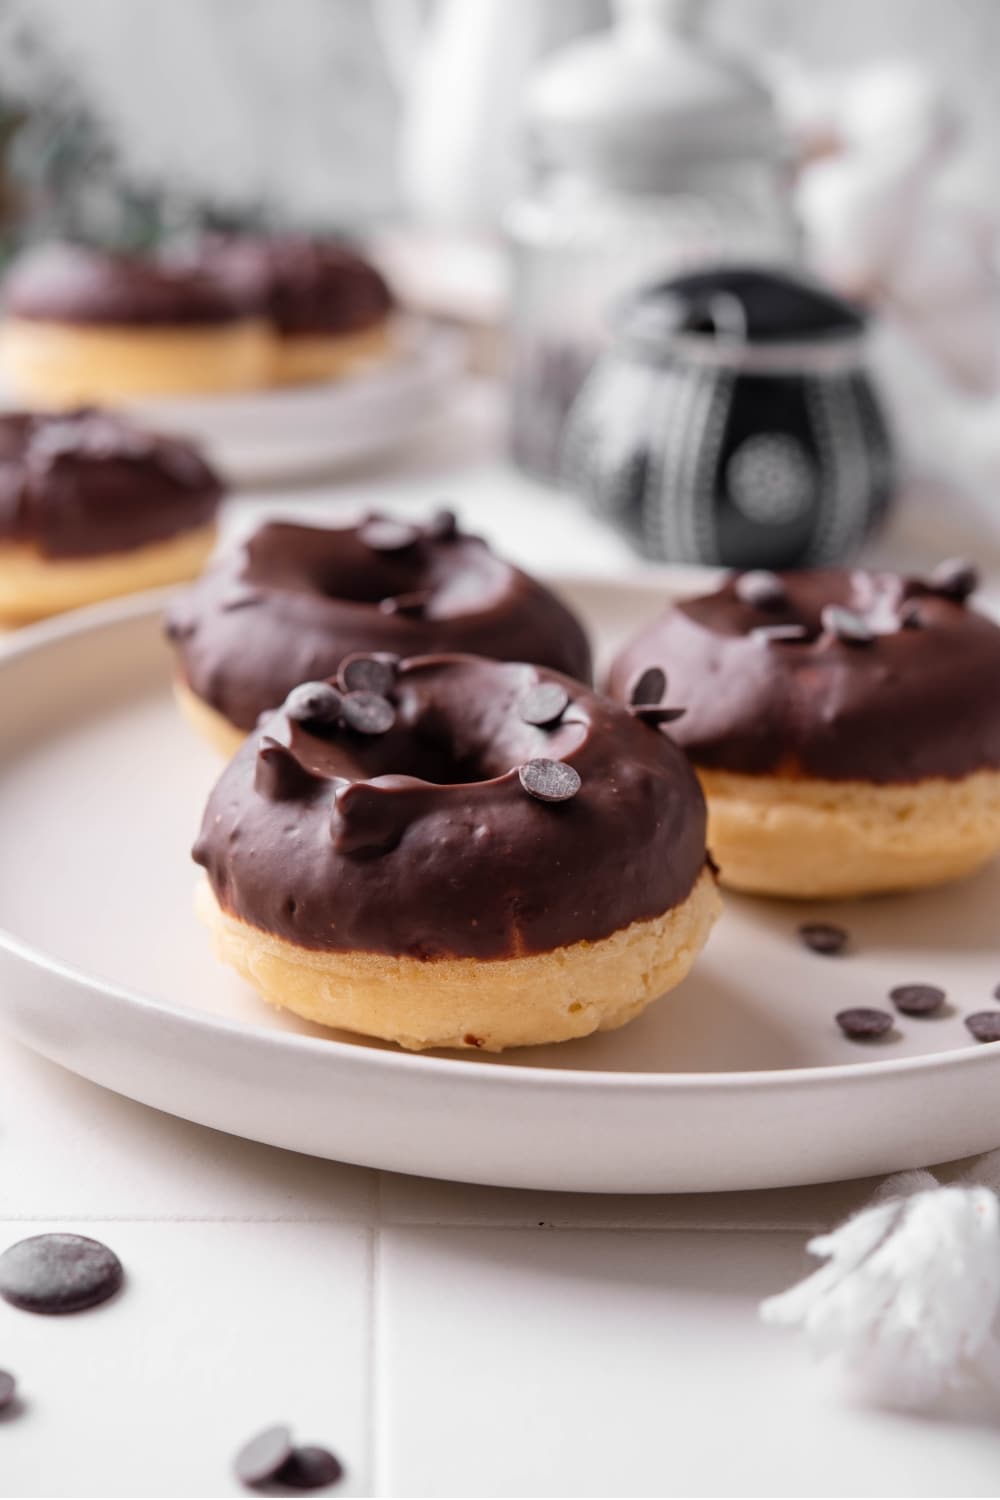 A ceramic plate with three baked donuts with chocolate frosting on top. The donuts are sprinkled with chocolate chips and there is an additional plate of donuts in the background.